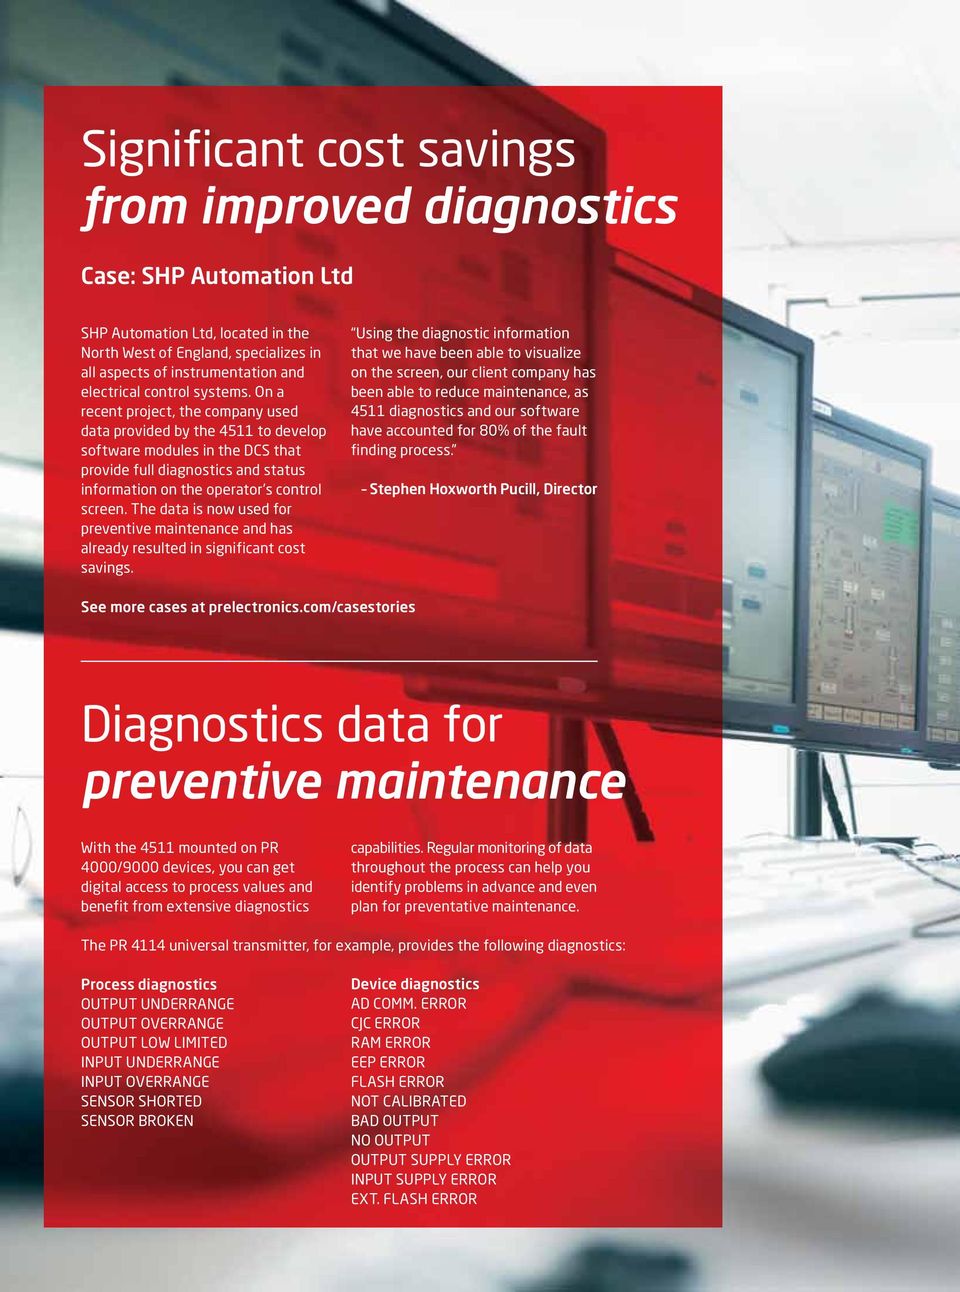 On a recent project, the company used data provided by the 4511 to develop software modules in the DCS that provide full diagnostics and status information on the operator s control screen.